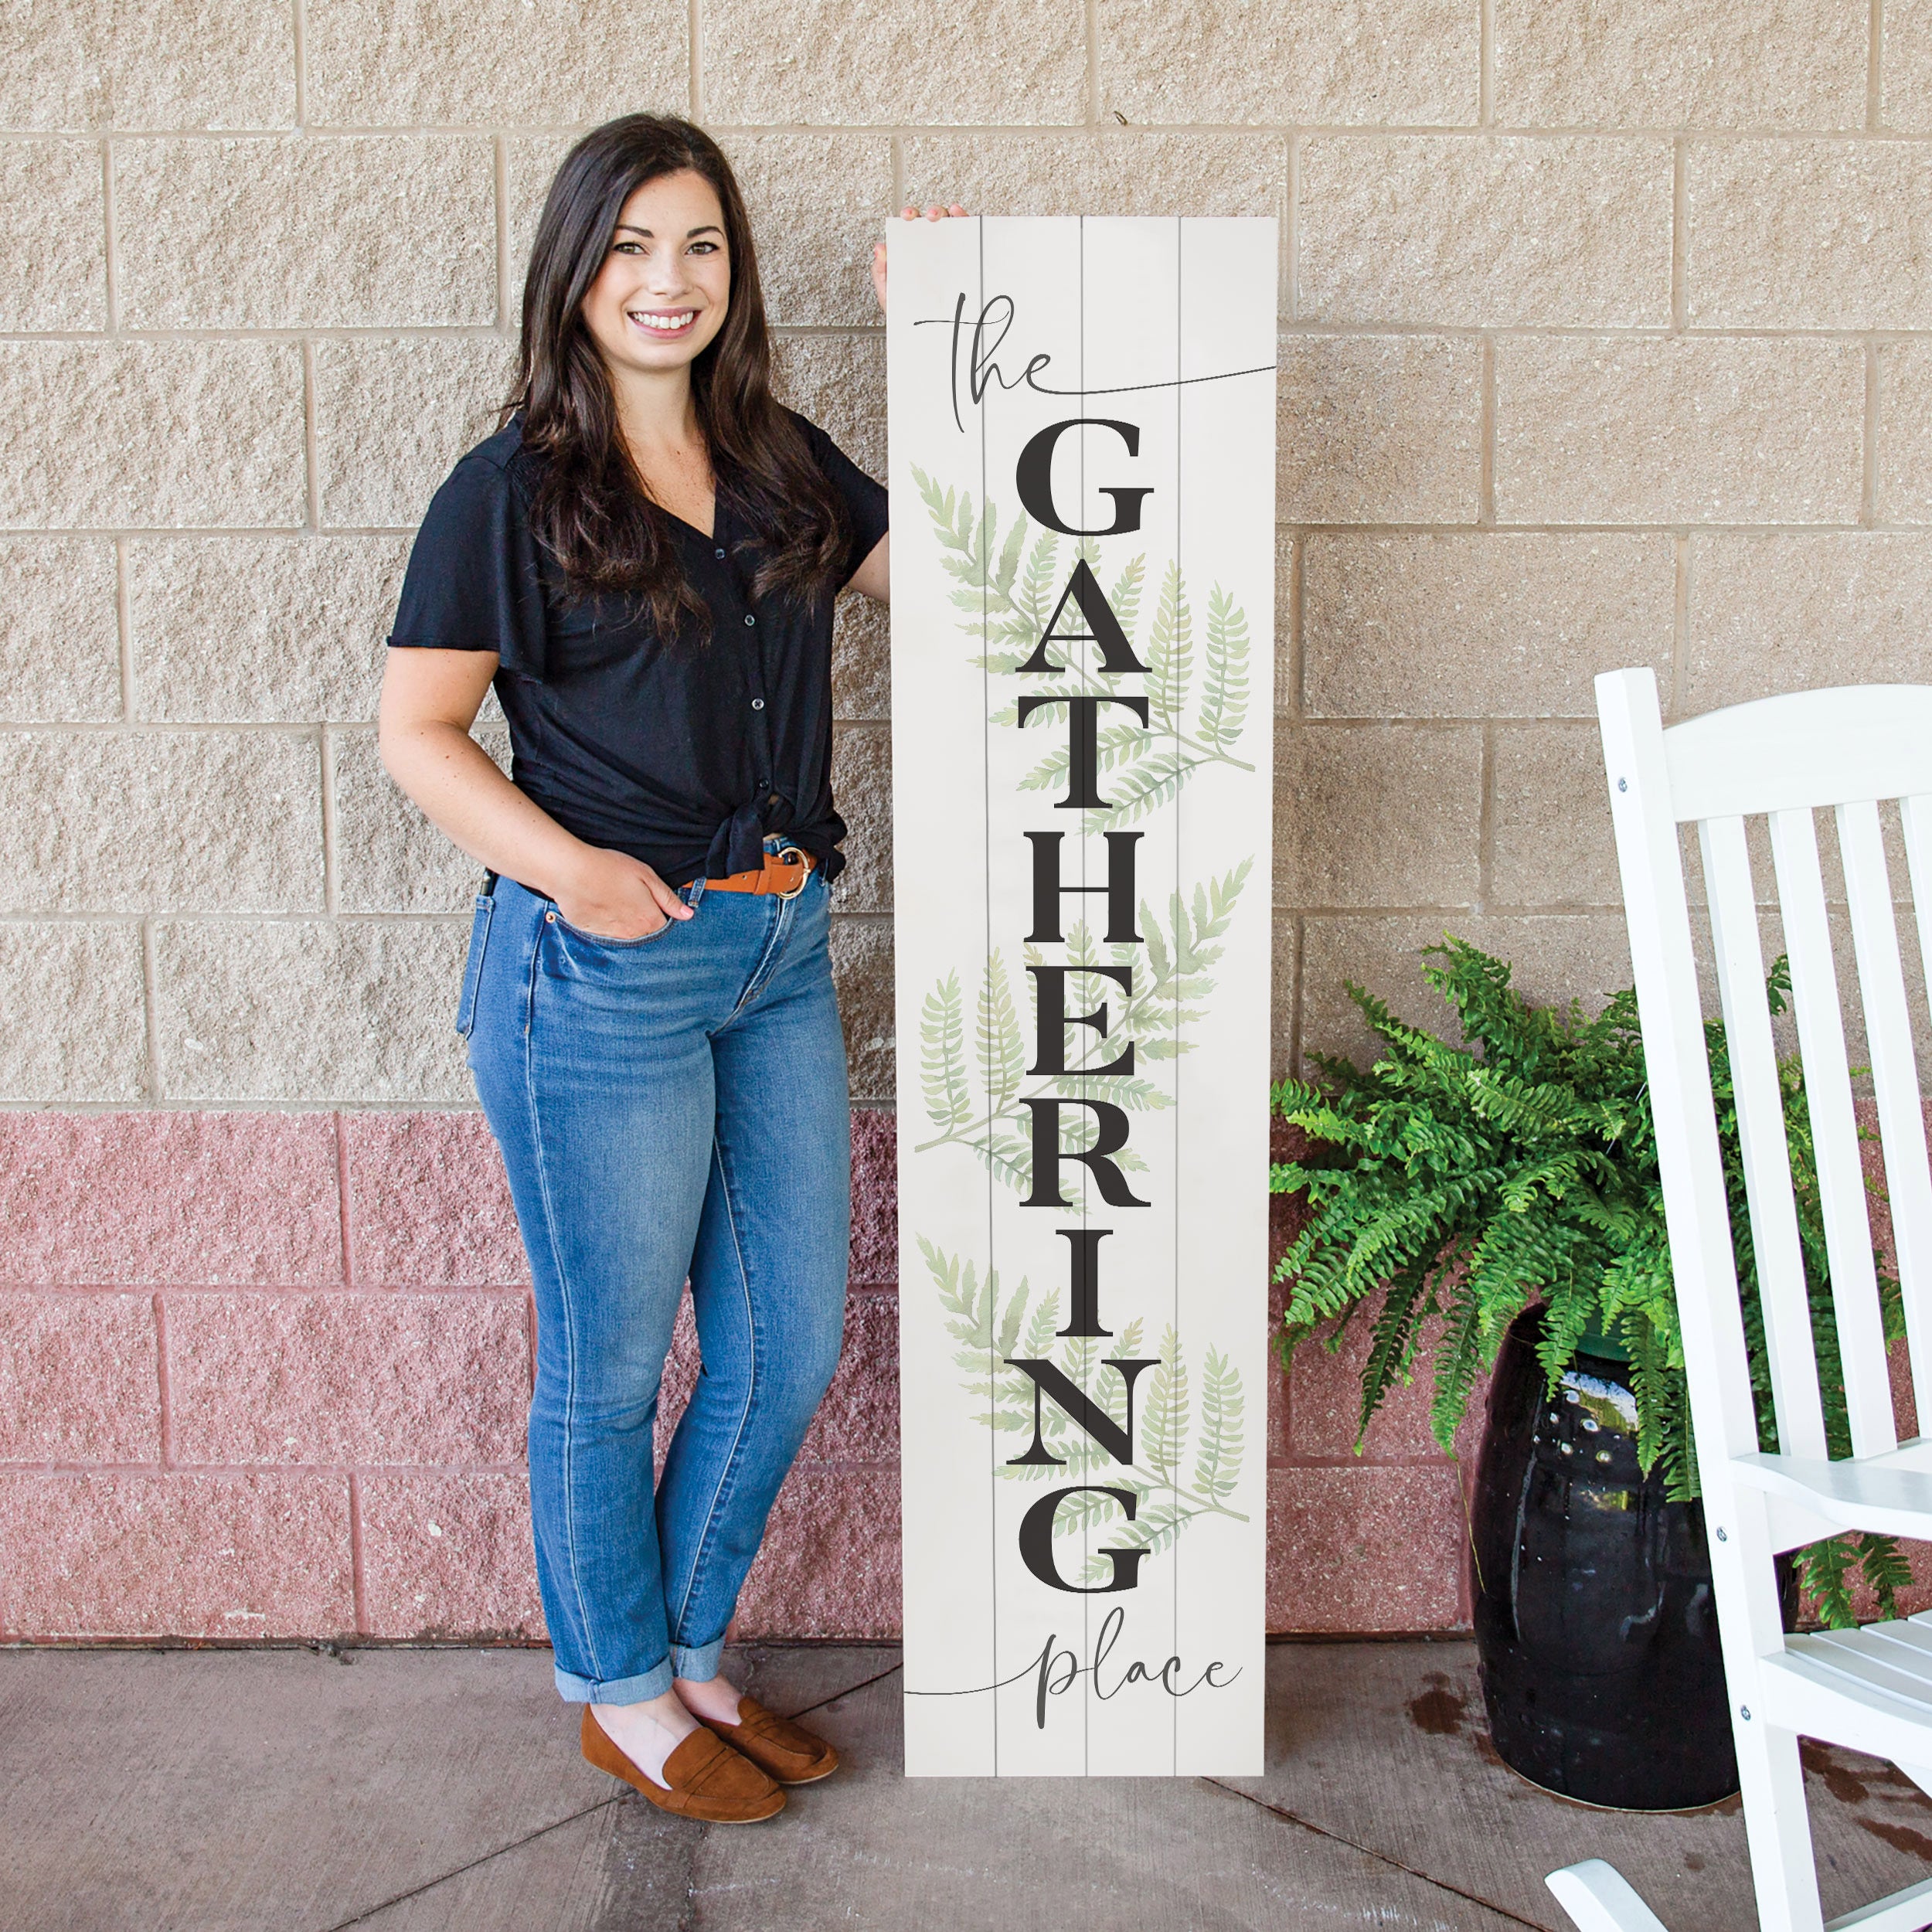 *The Gathering Place Outdoor Porch Sign